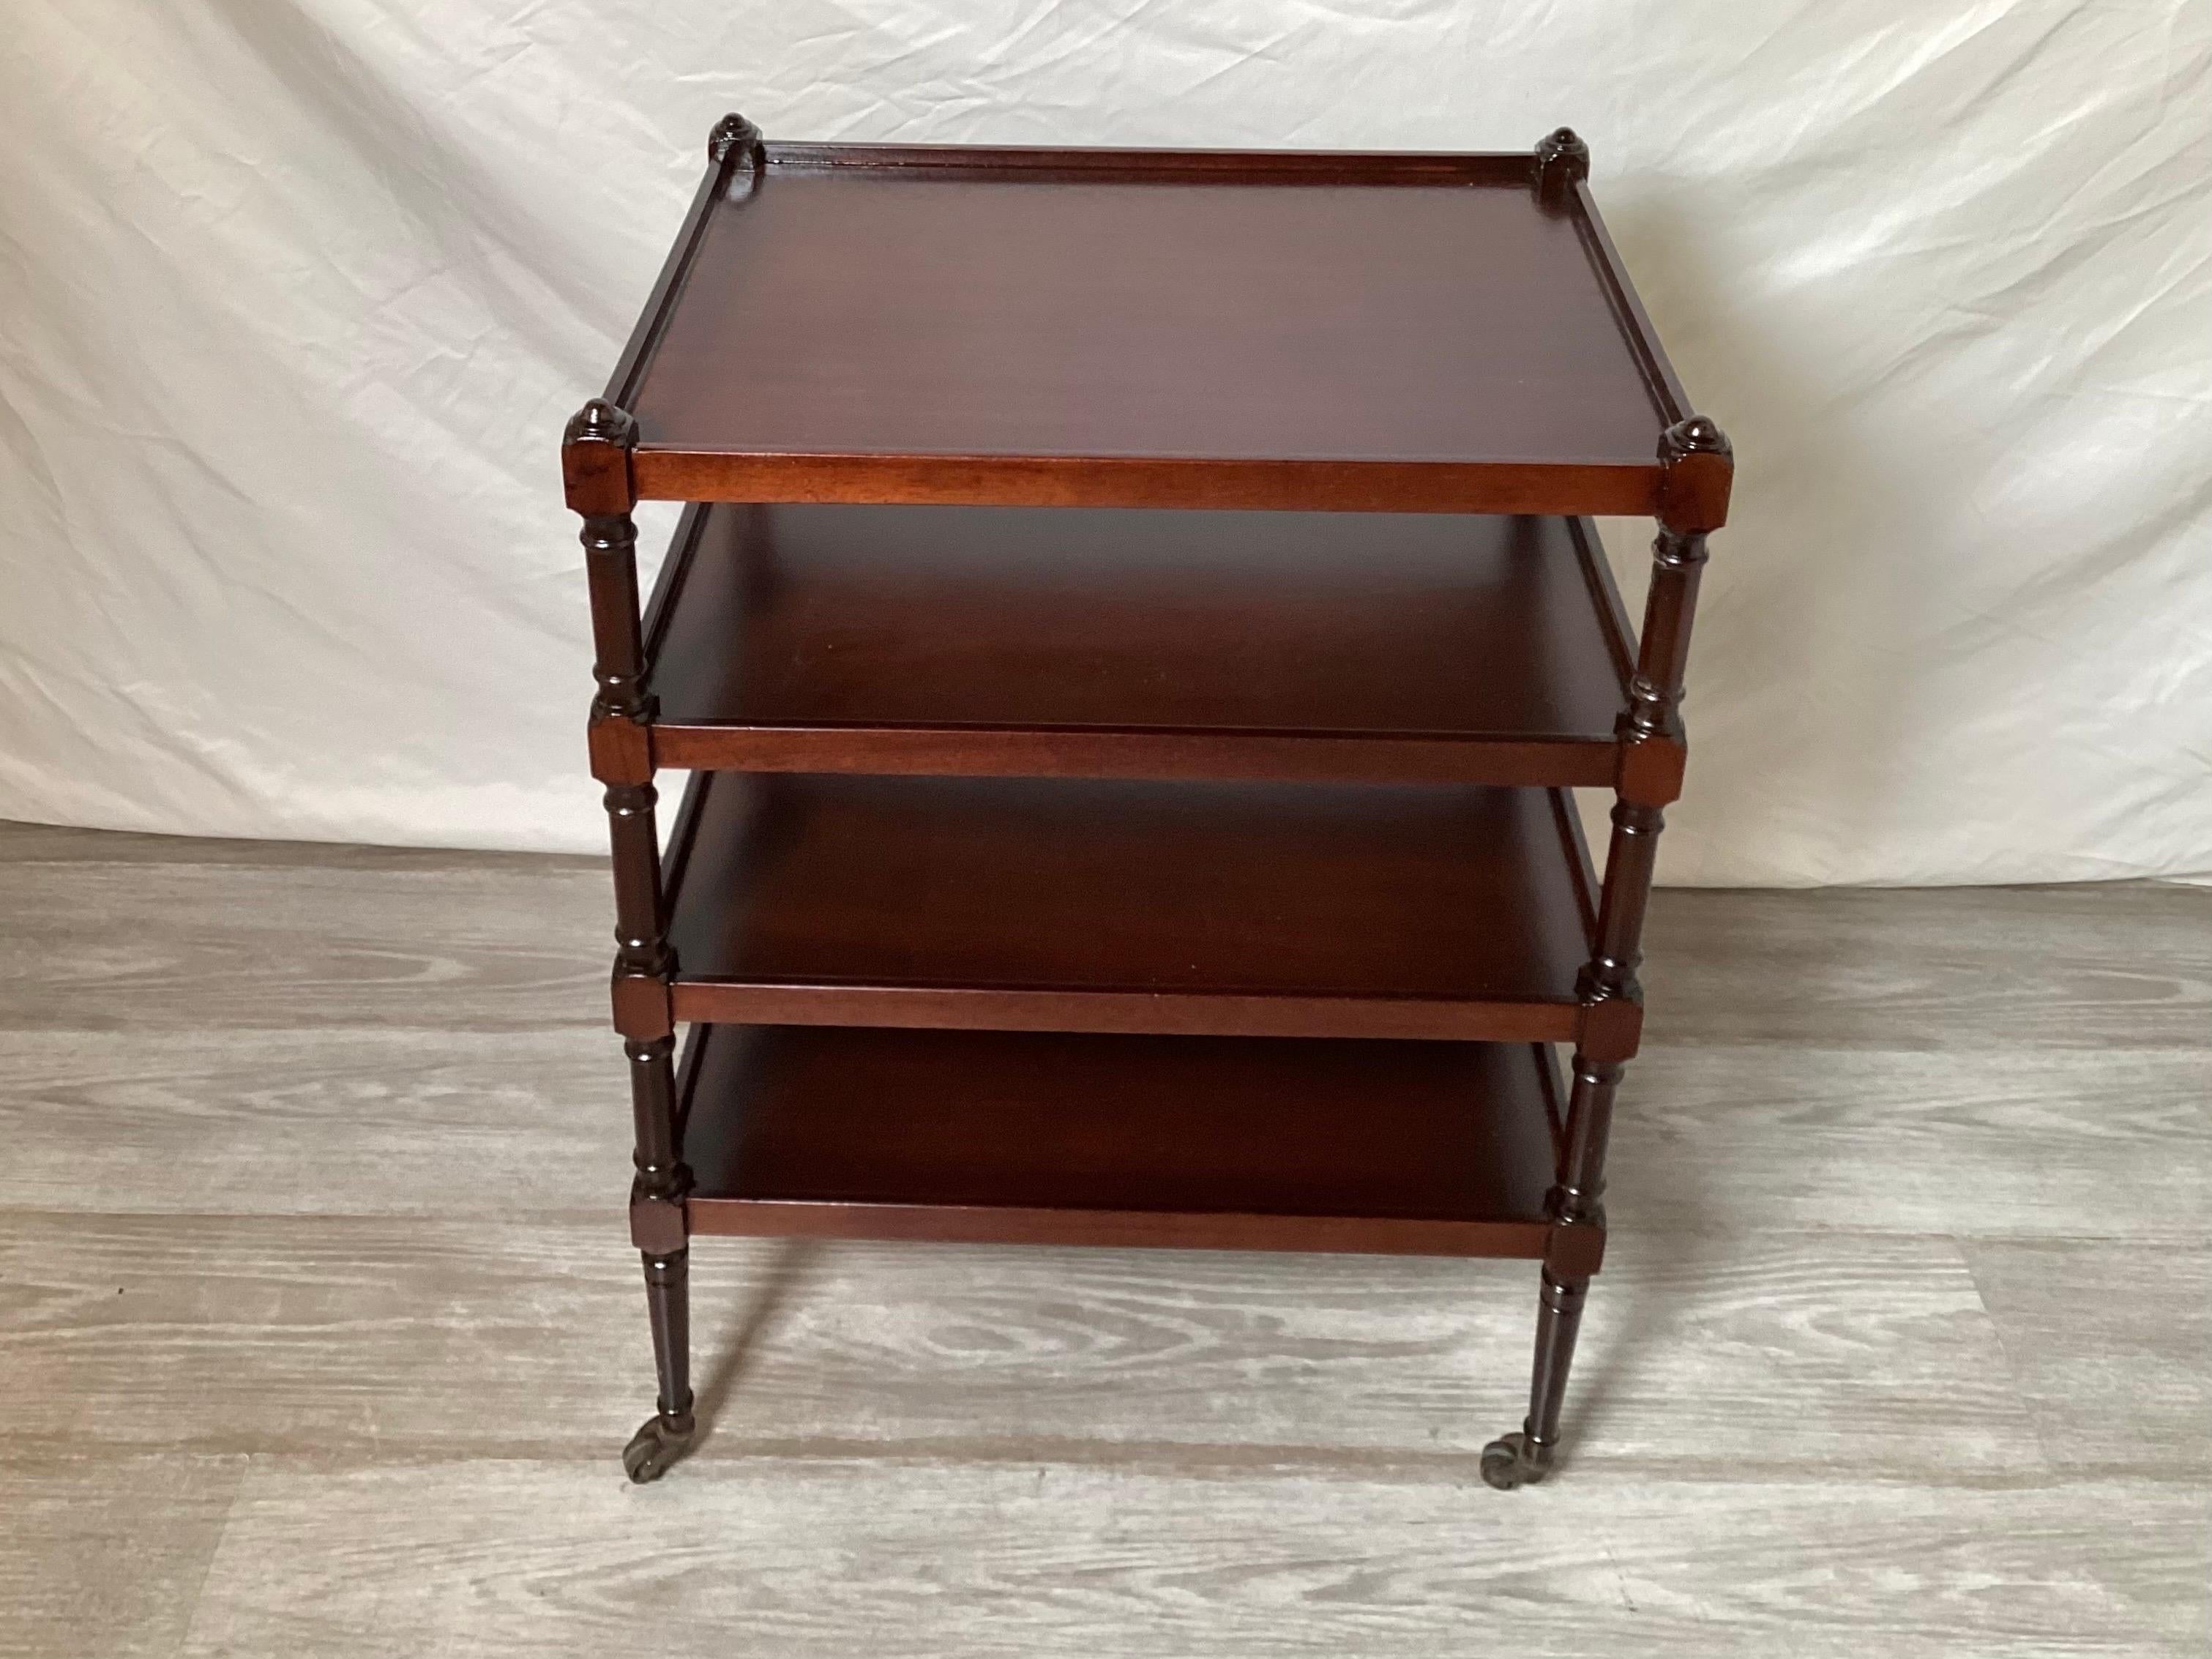 Elegant mahogany four tiered rectangular side table with original patinated brass castors. The table with plenty of storage and display area with four turned legs with low gallery edge on each shelf.